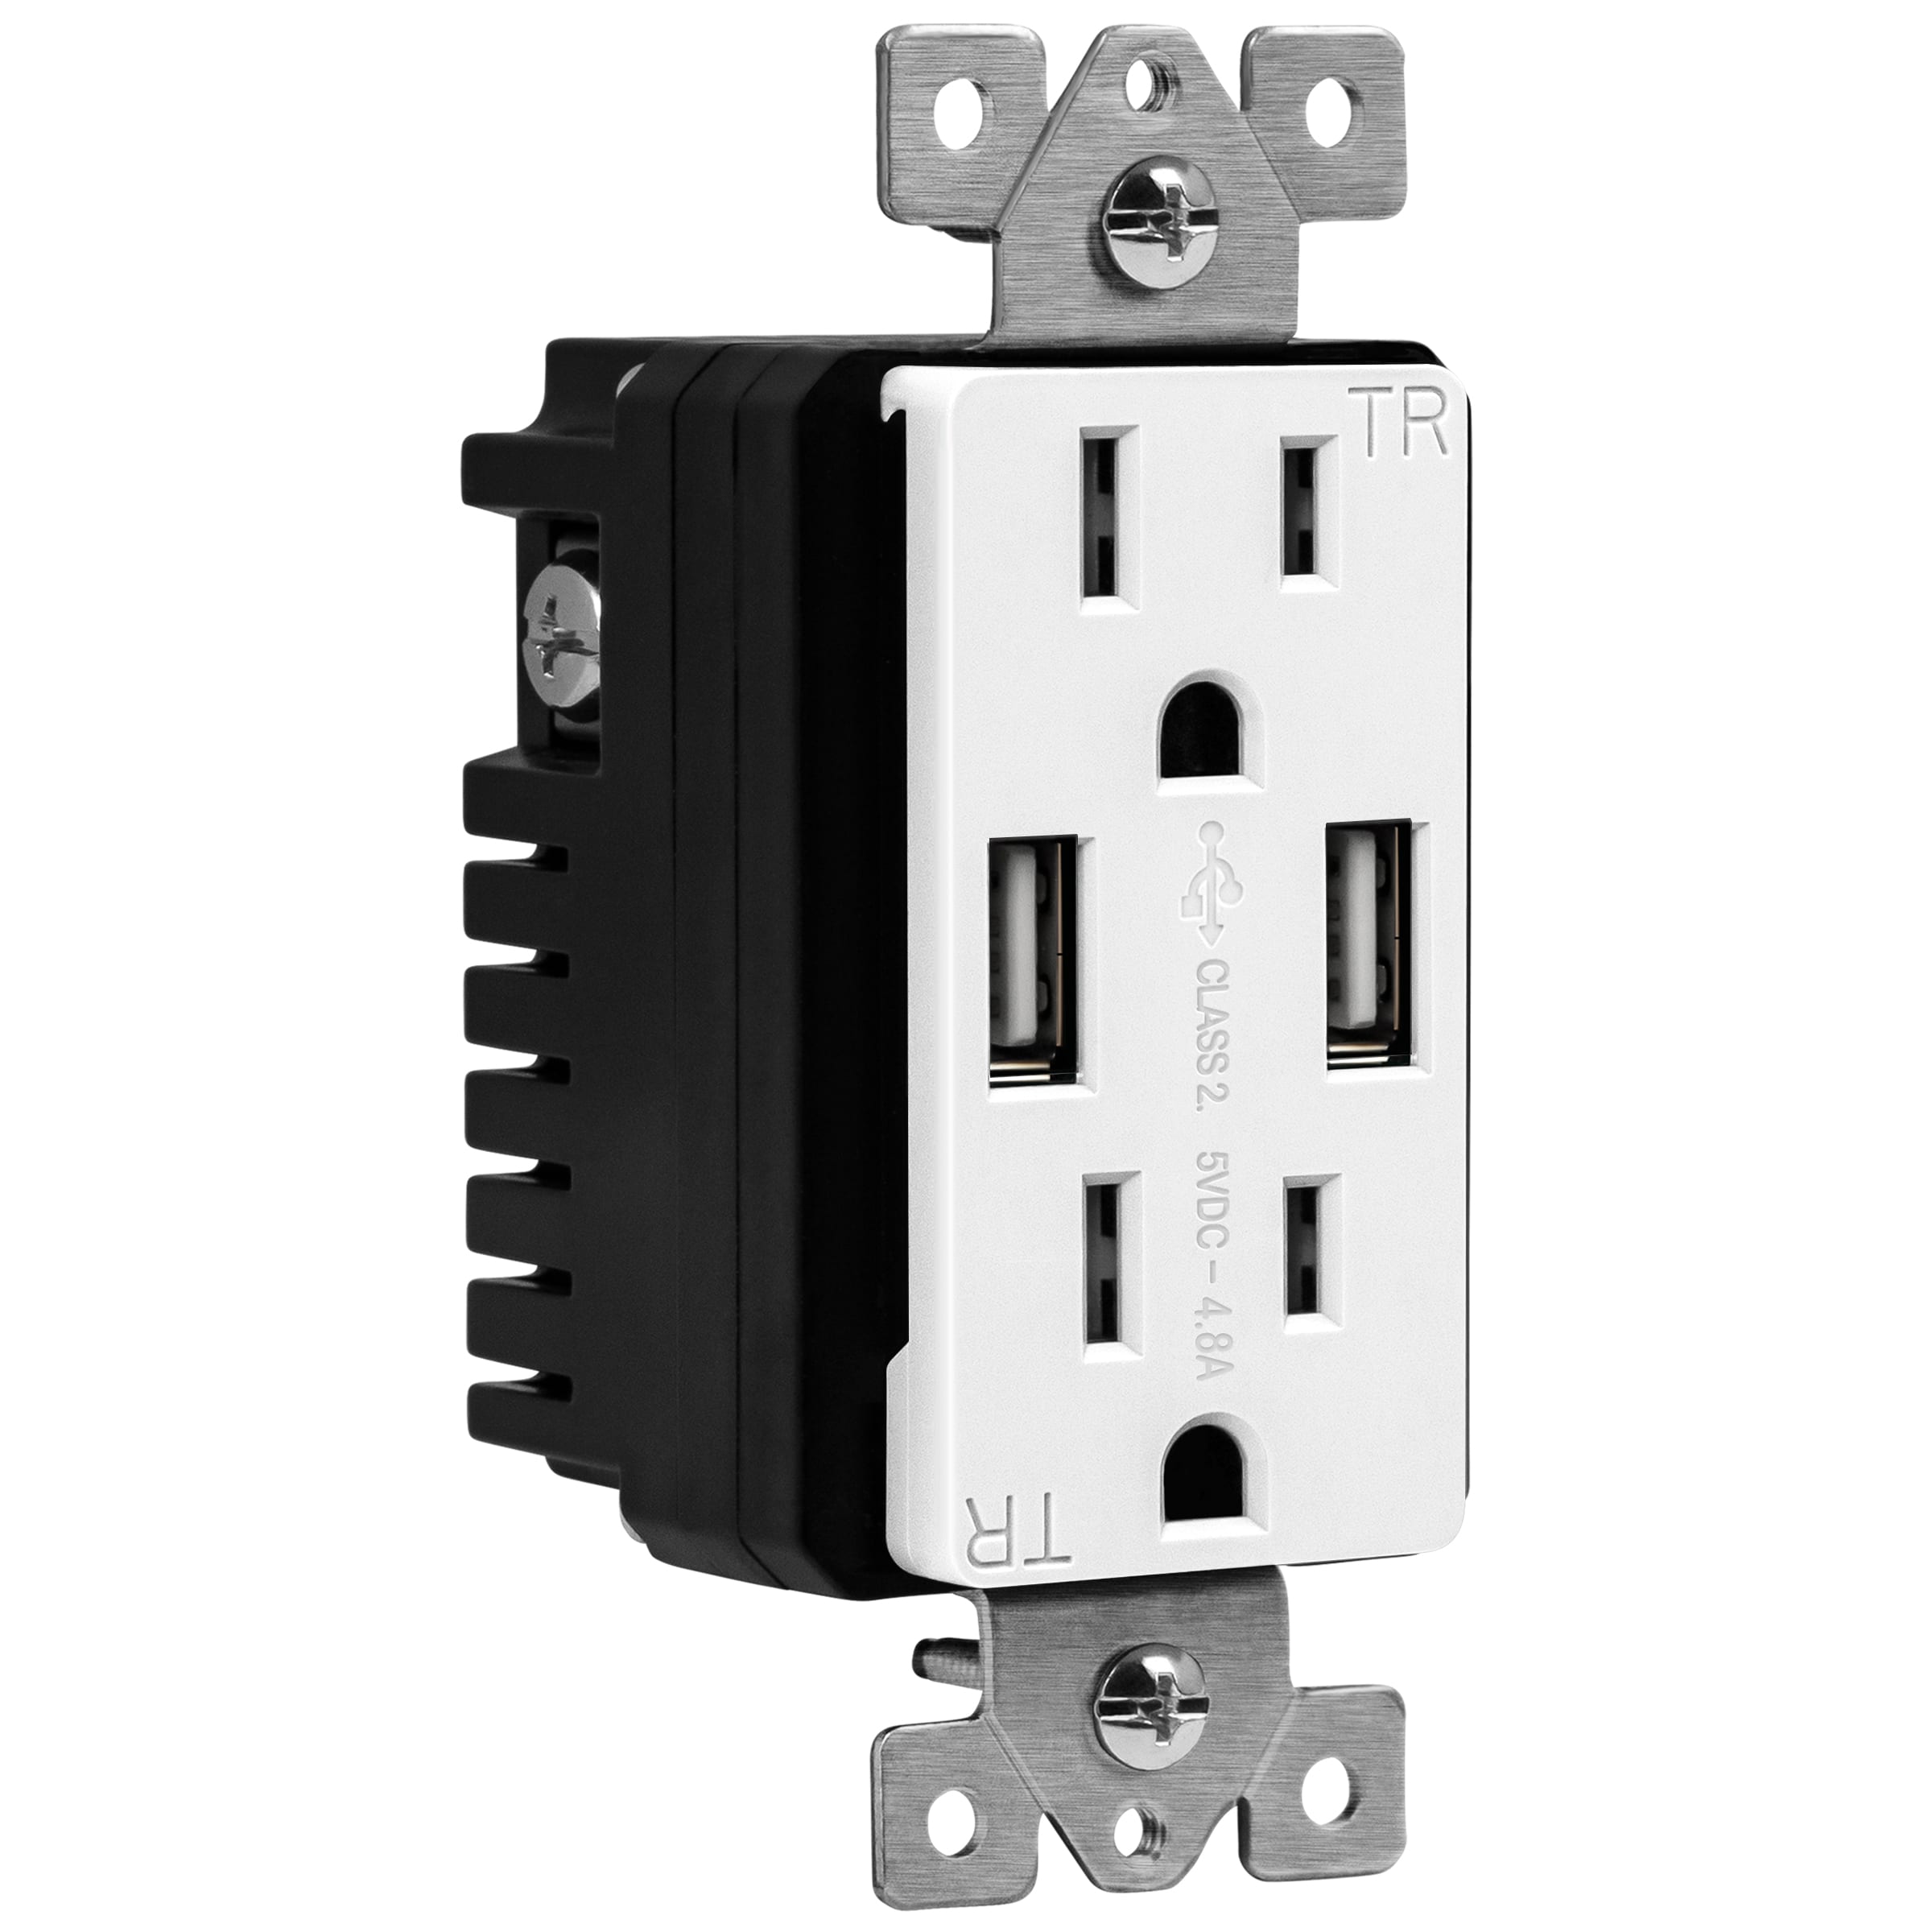 Gray TOPGREENER 4.8A USB Charger Outlet Receptacle TU21548A 15A Tamper-Resistant Duplex Receptacle 